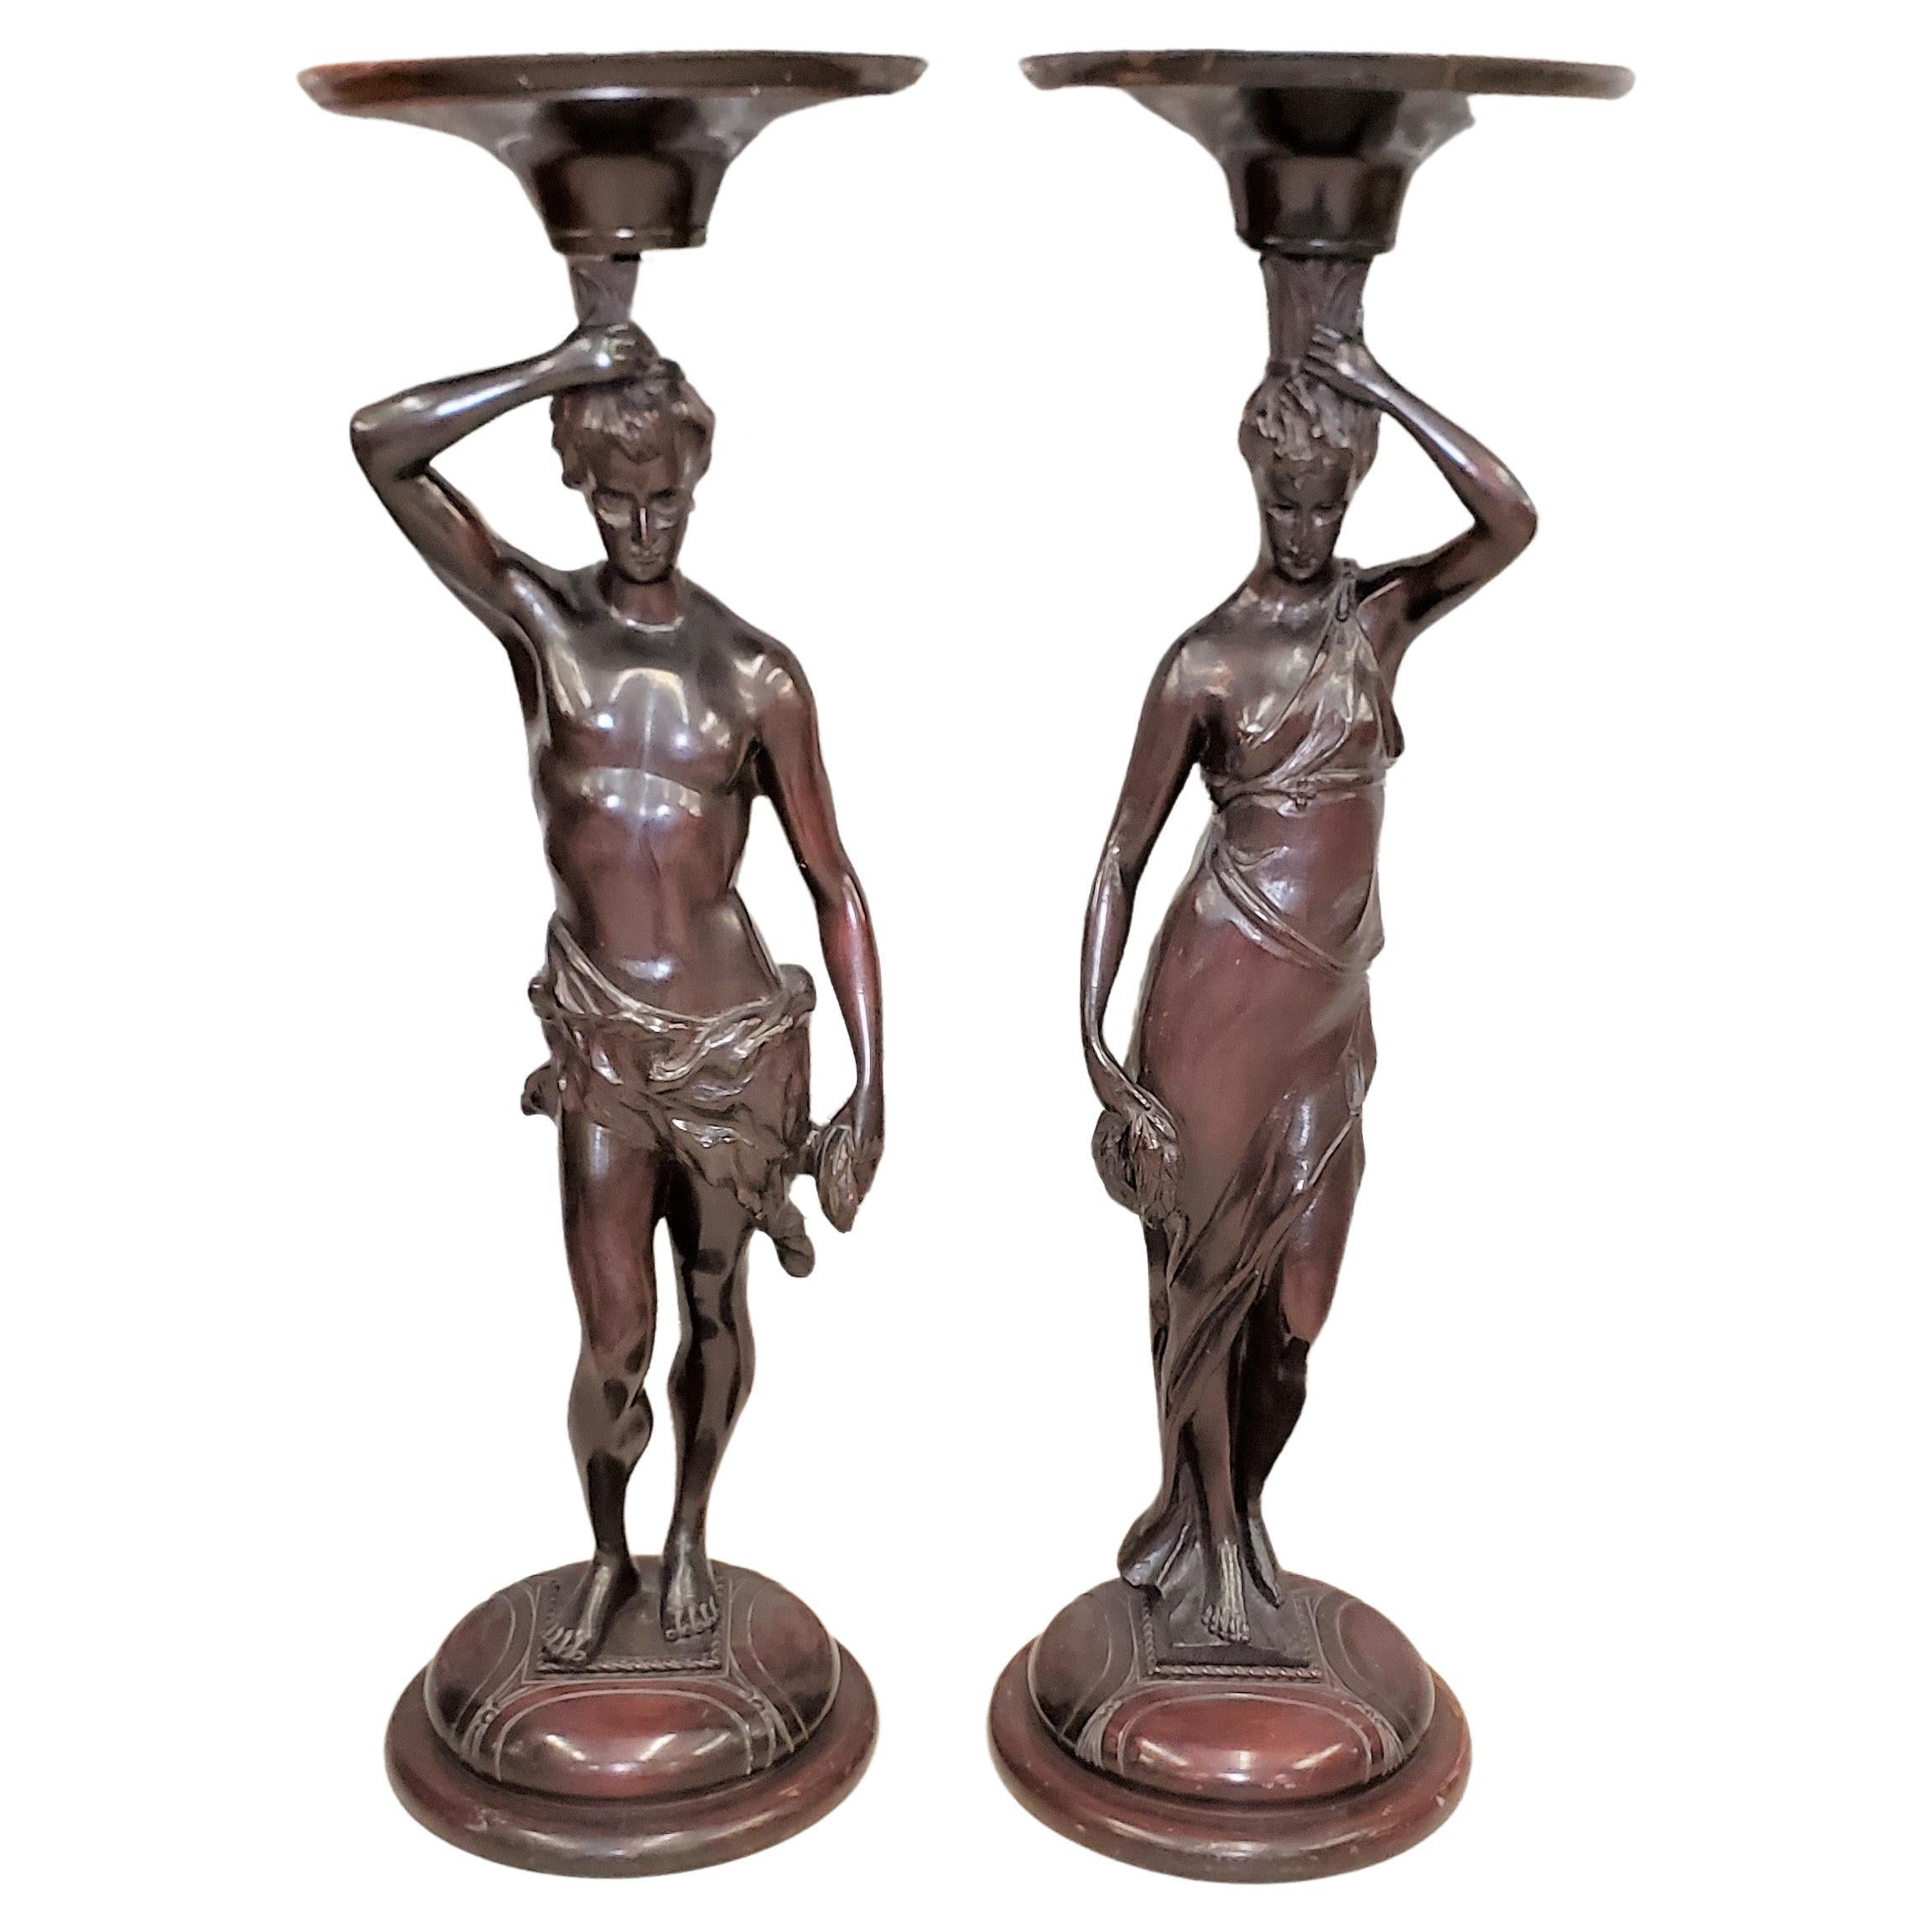 Pair of Antique Hand Carved Wooden Figural Pedestals of Neoclassical Figures For Sale